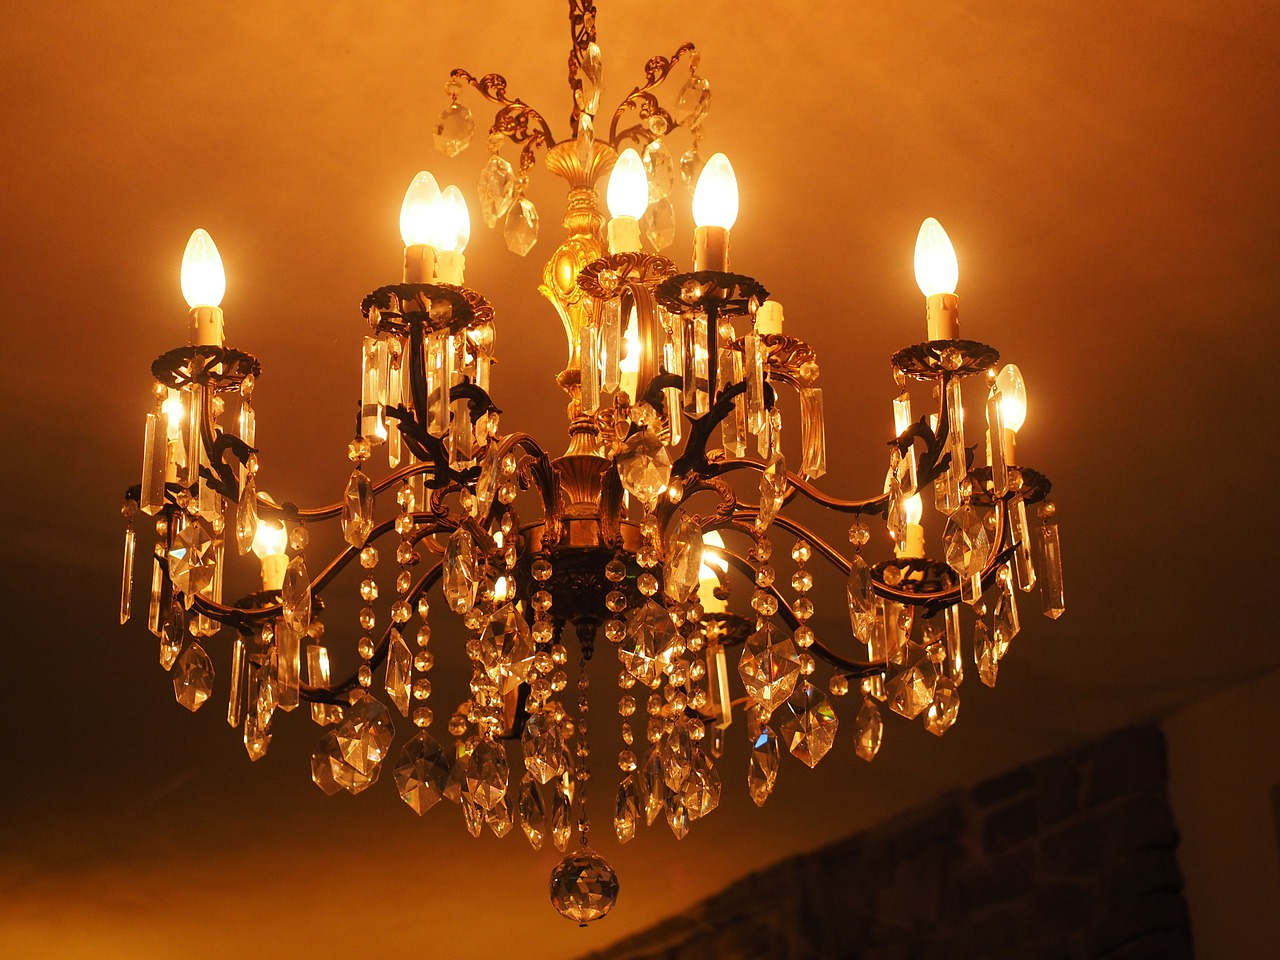 candlestick chandelier lamp free photo